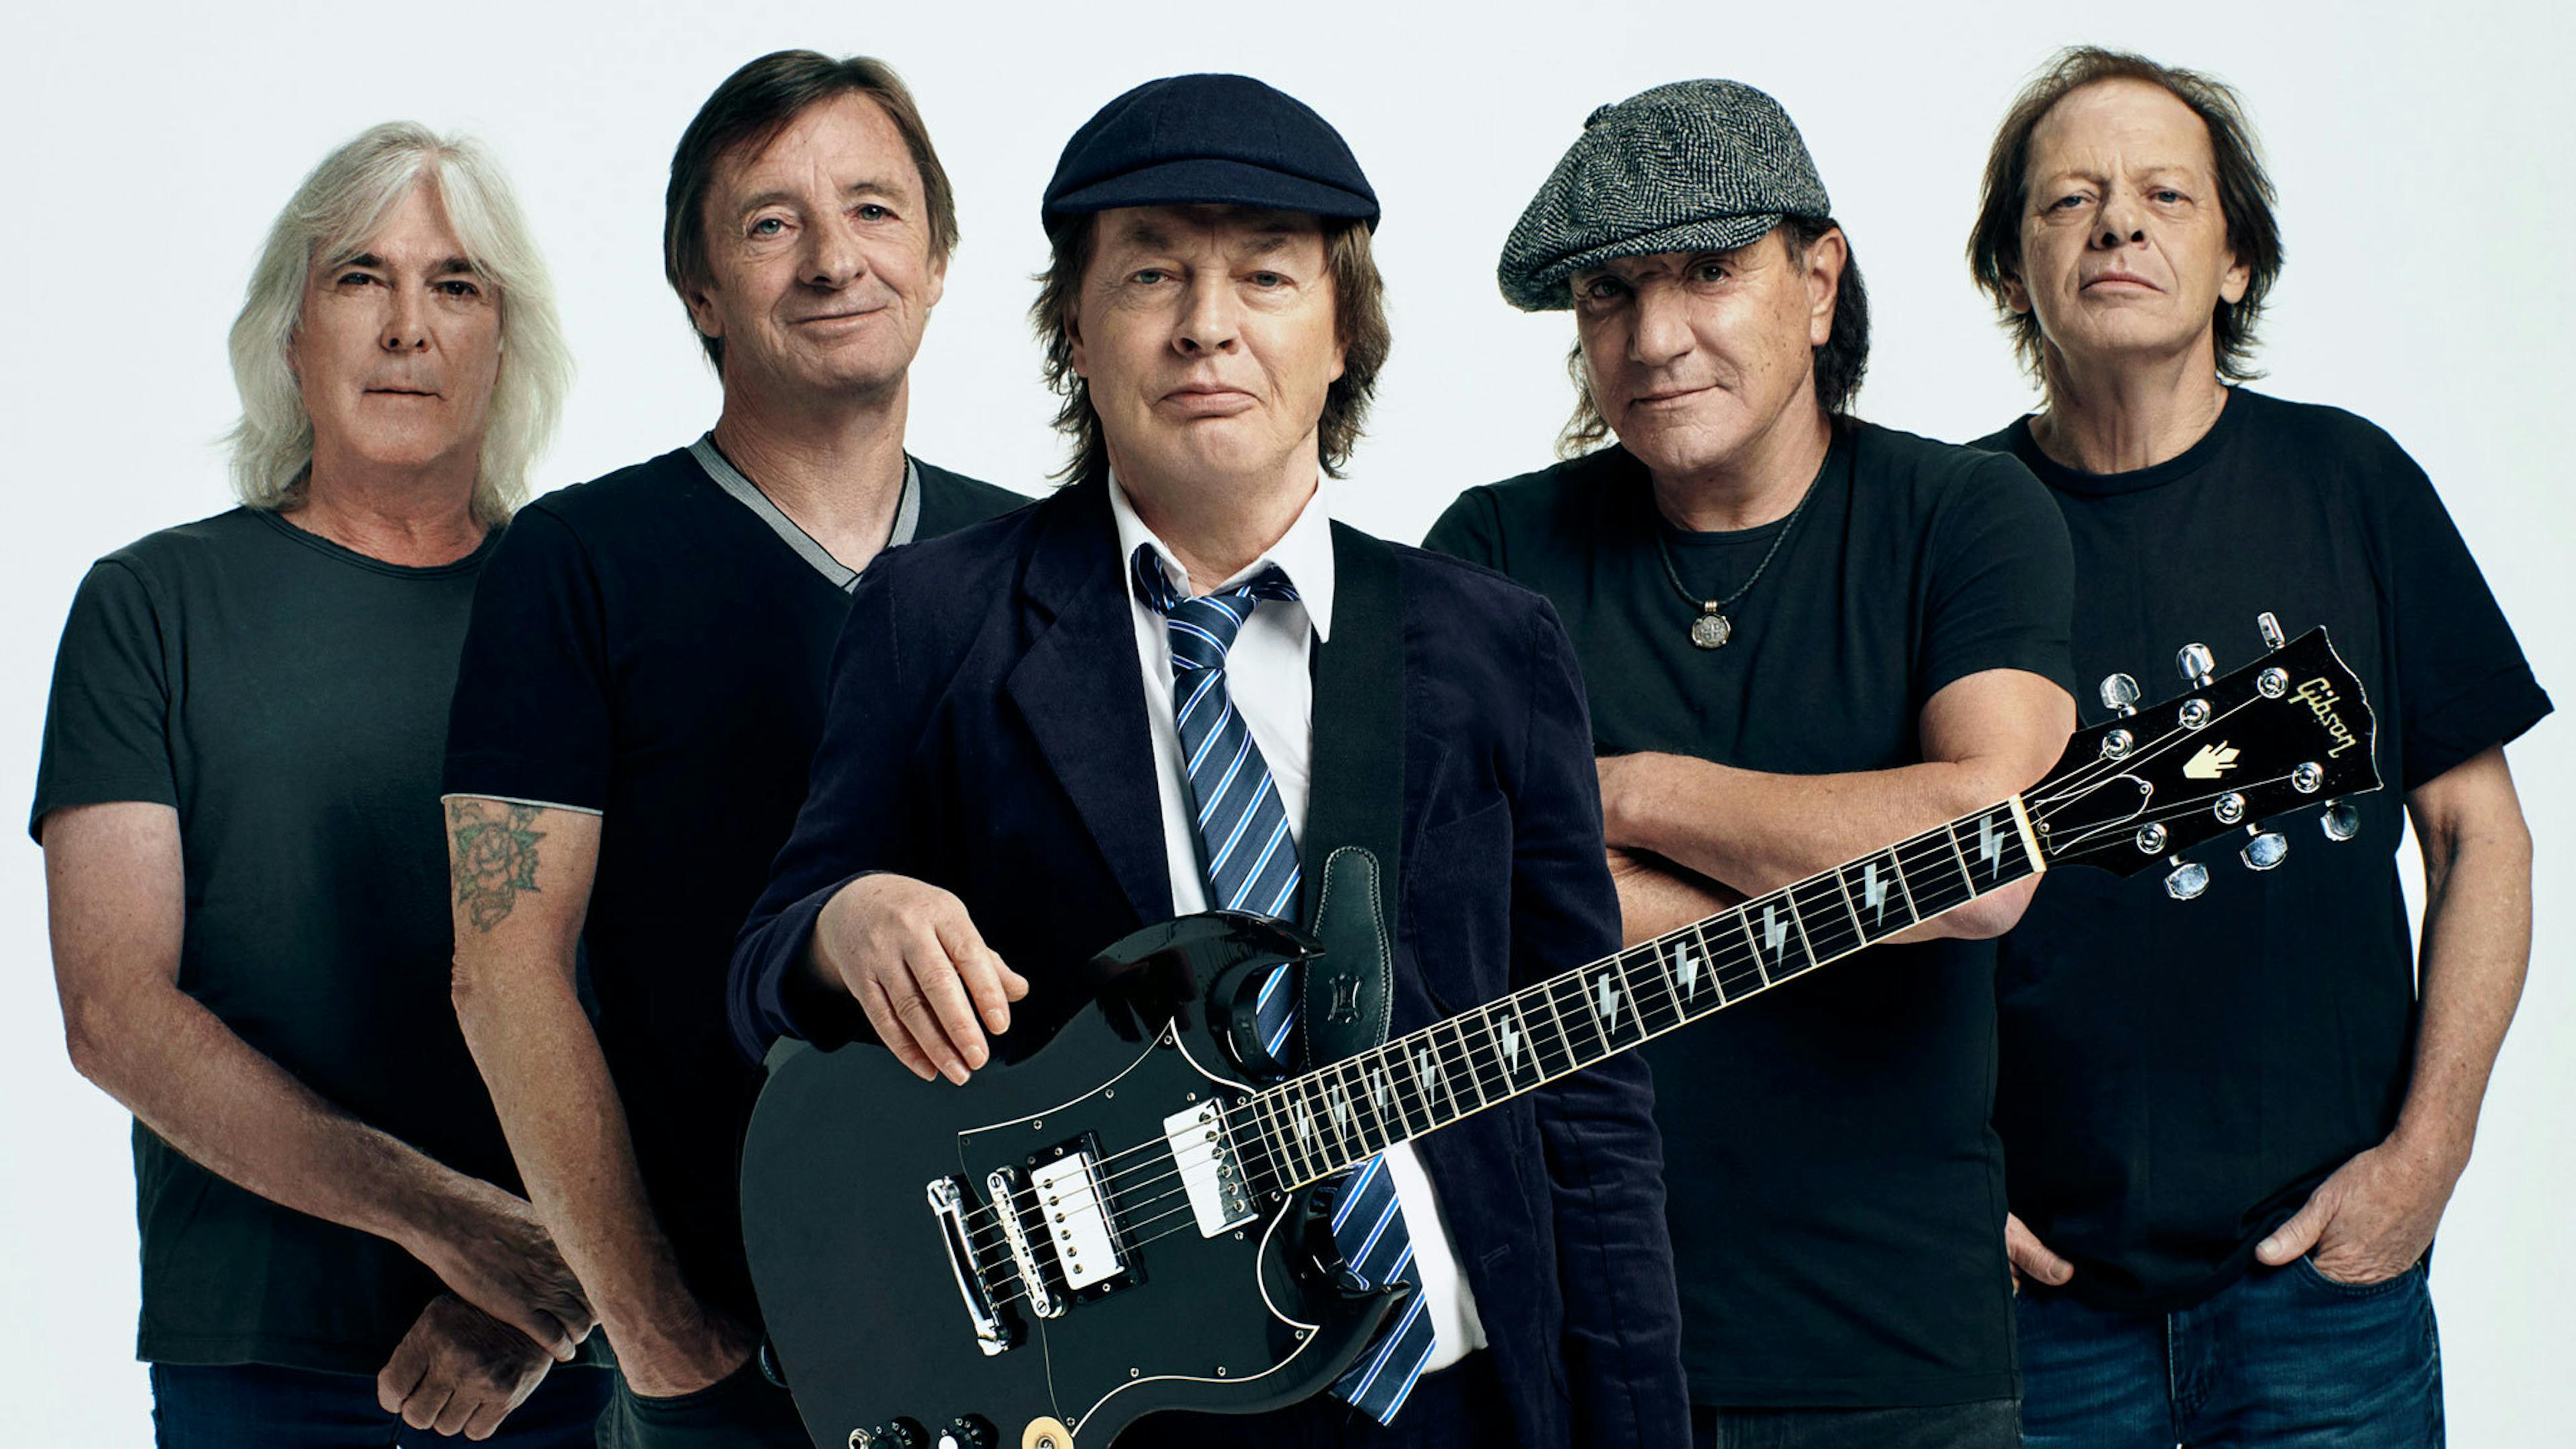 Here’s AC/DC’s setlist from their POWER UP European tour